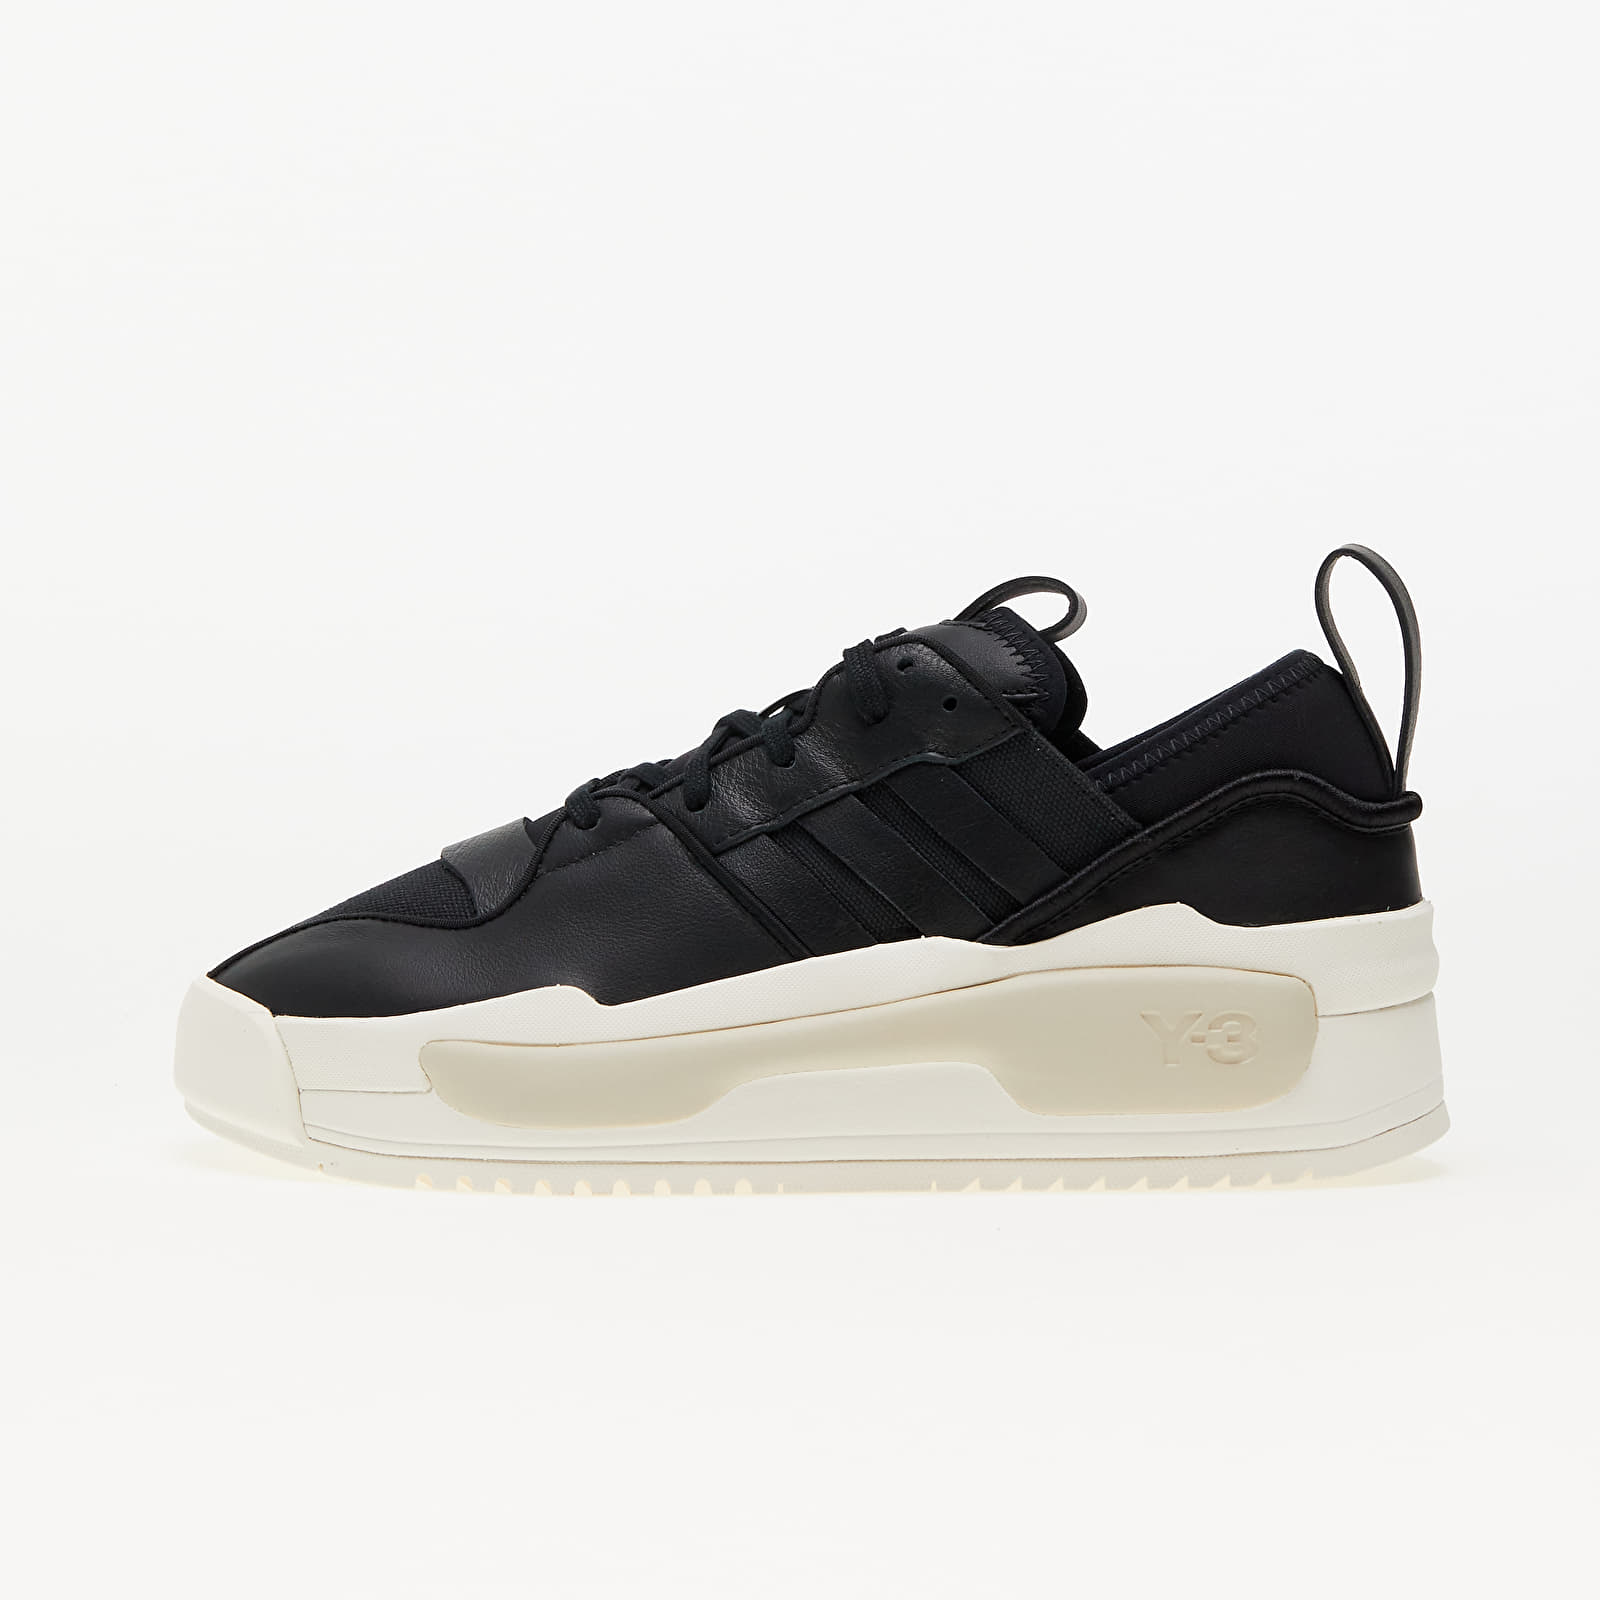 Men's shoes Y-3 Rivalry Black/ Off White/ Clear Brown